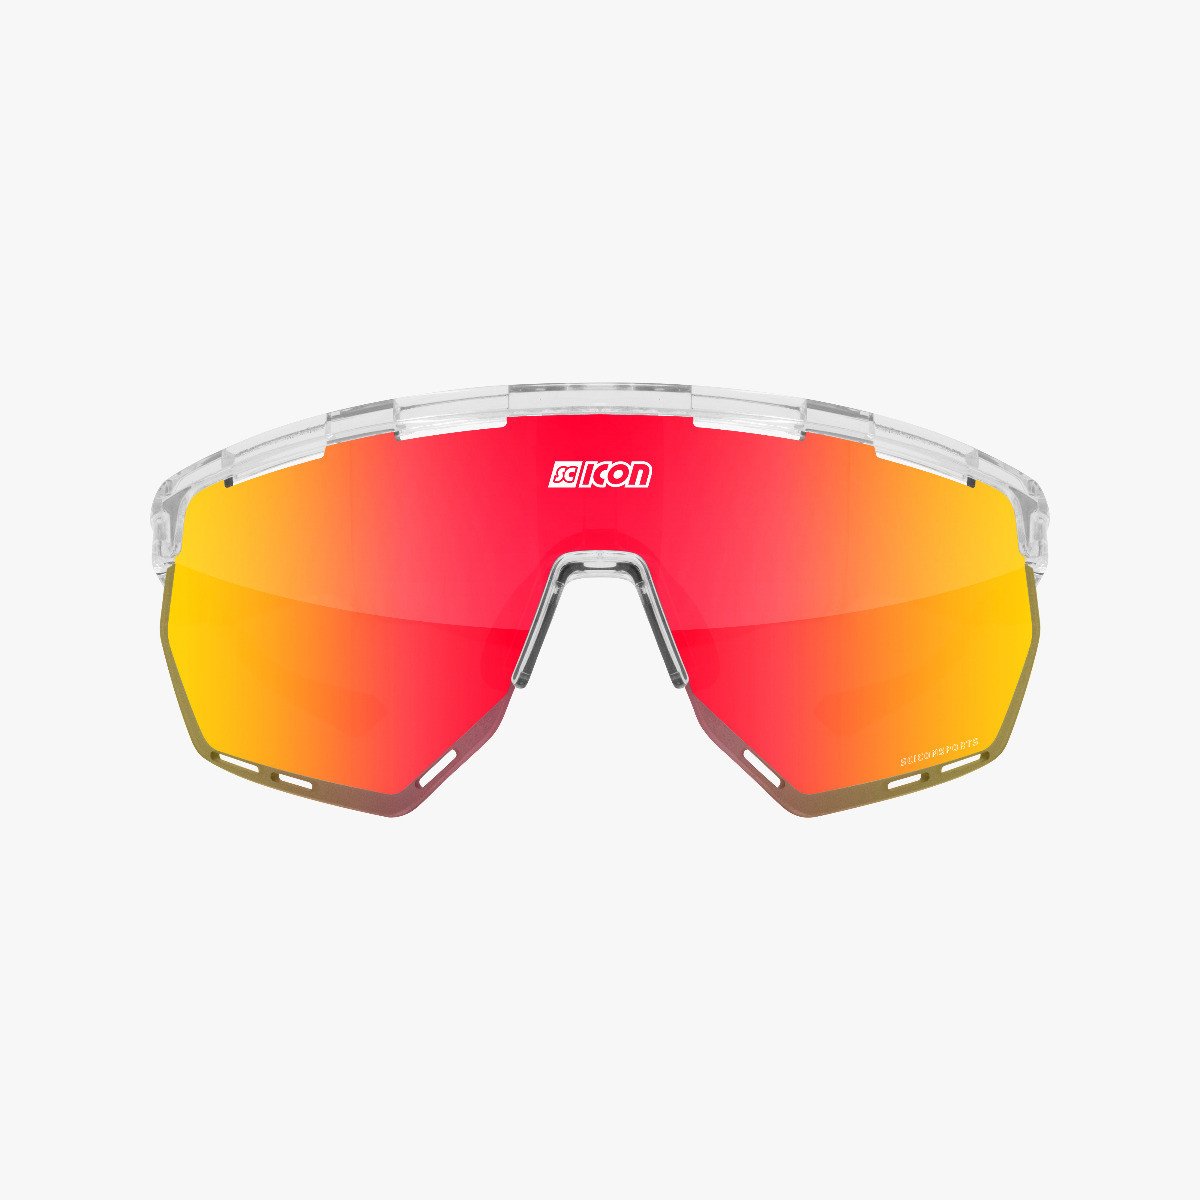 Scicon Sports | Aerowing Sport Performance Sunglasses - Crystal Gloss / Multimirror Red - EY26060701